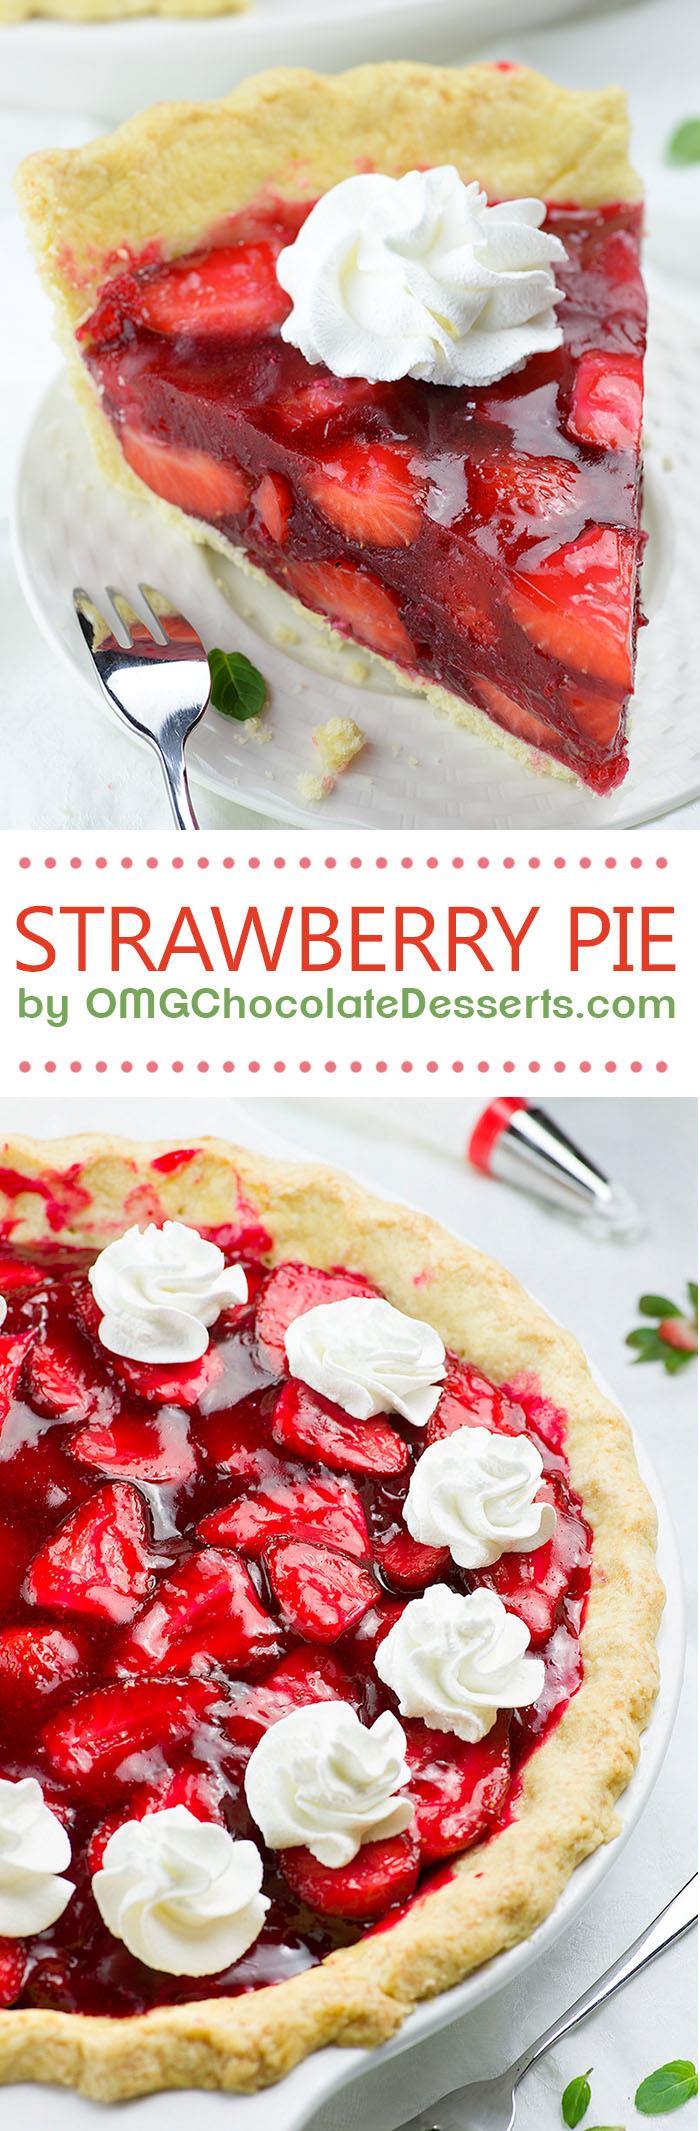 Fresh Strawberry Pie is delicious and easy summer dessert. Buttery pie crust, overloaded with fresh, juicy strawberries and gooey strawberry glaze.